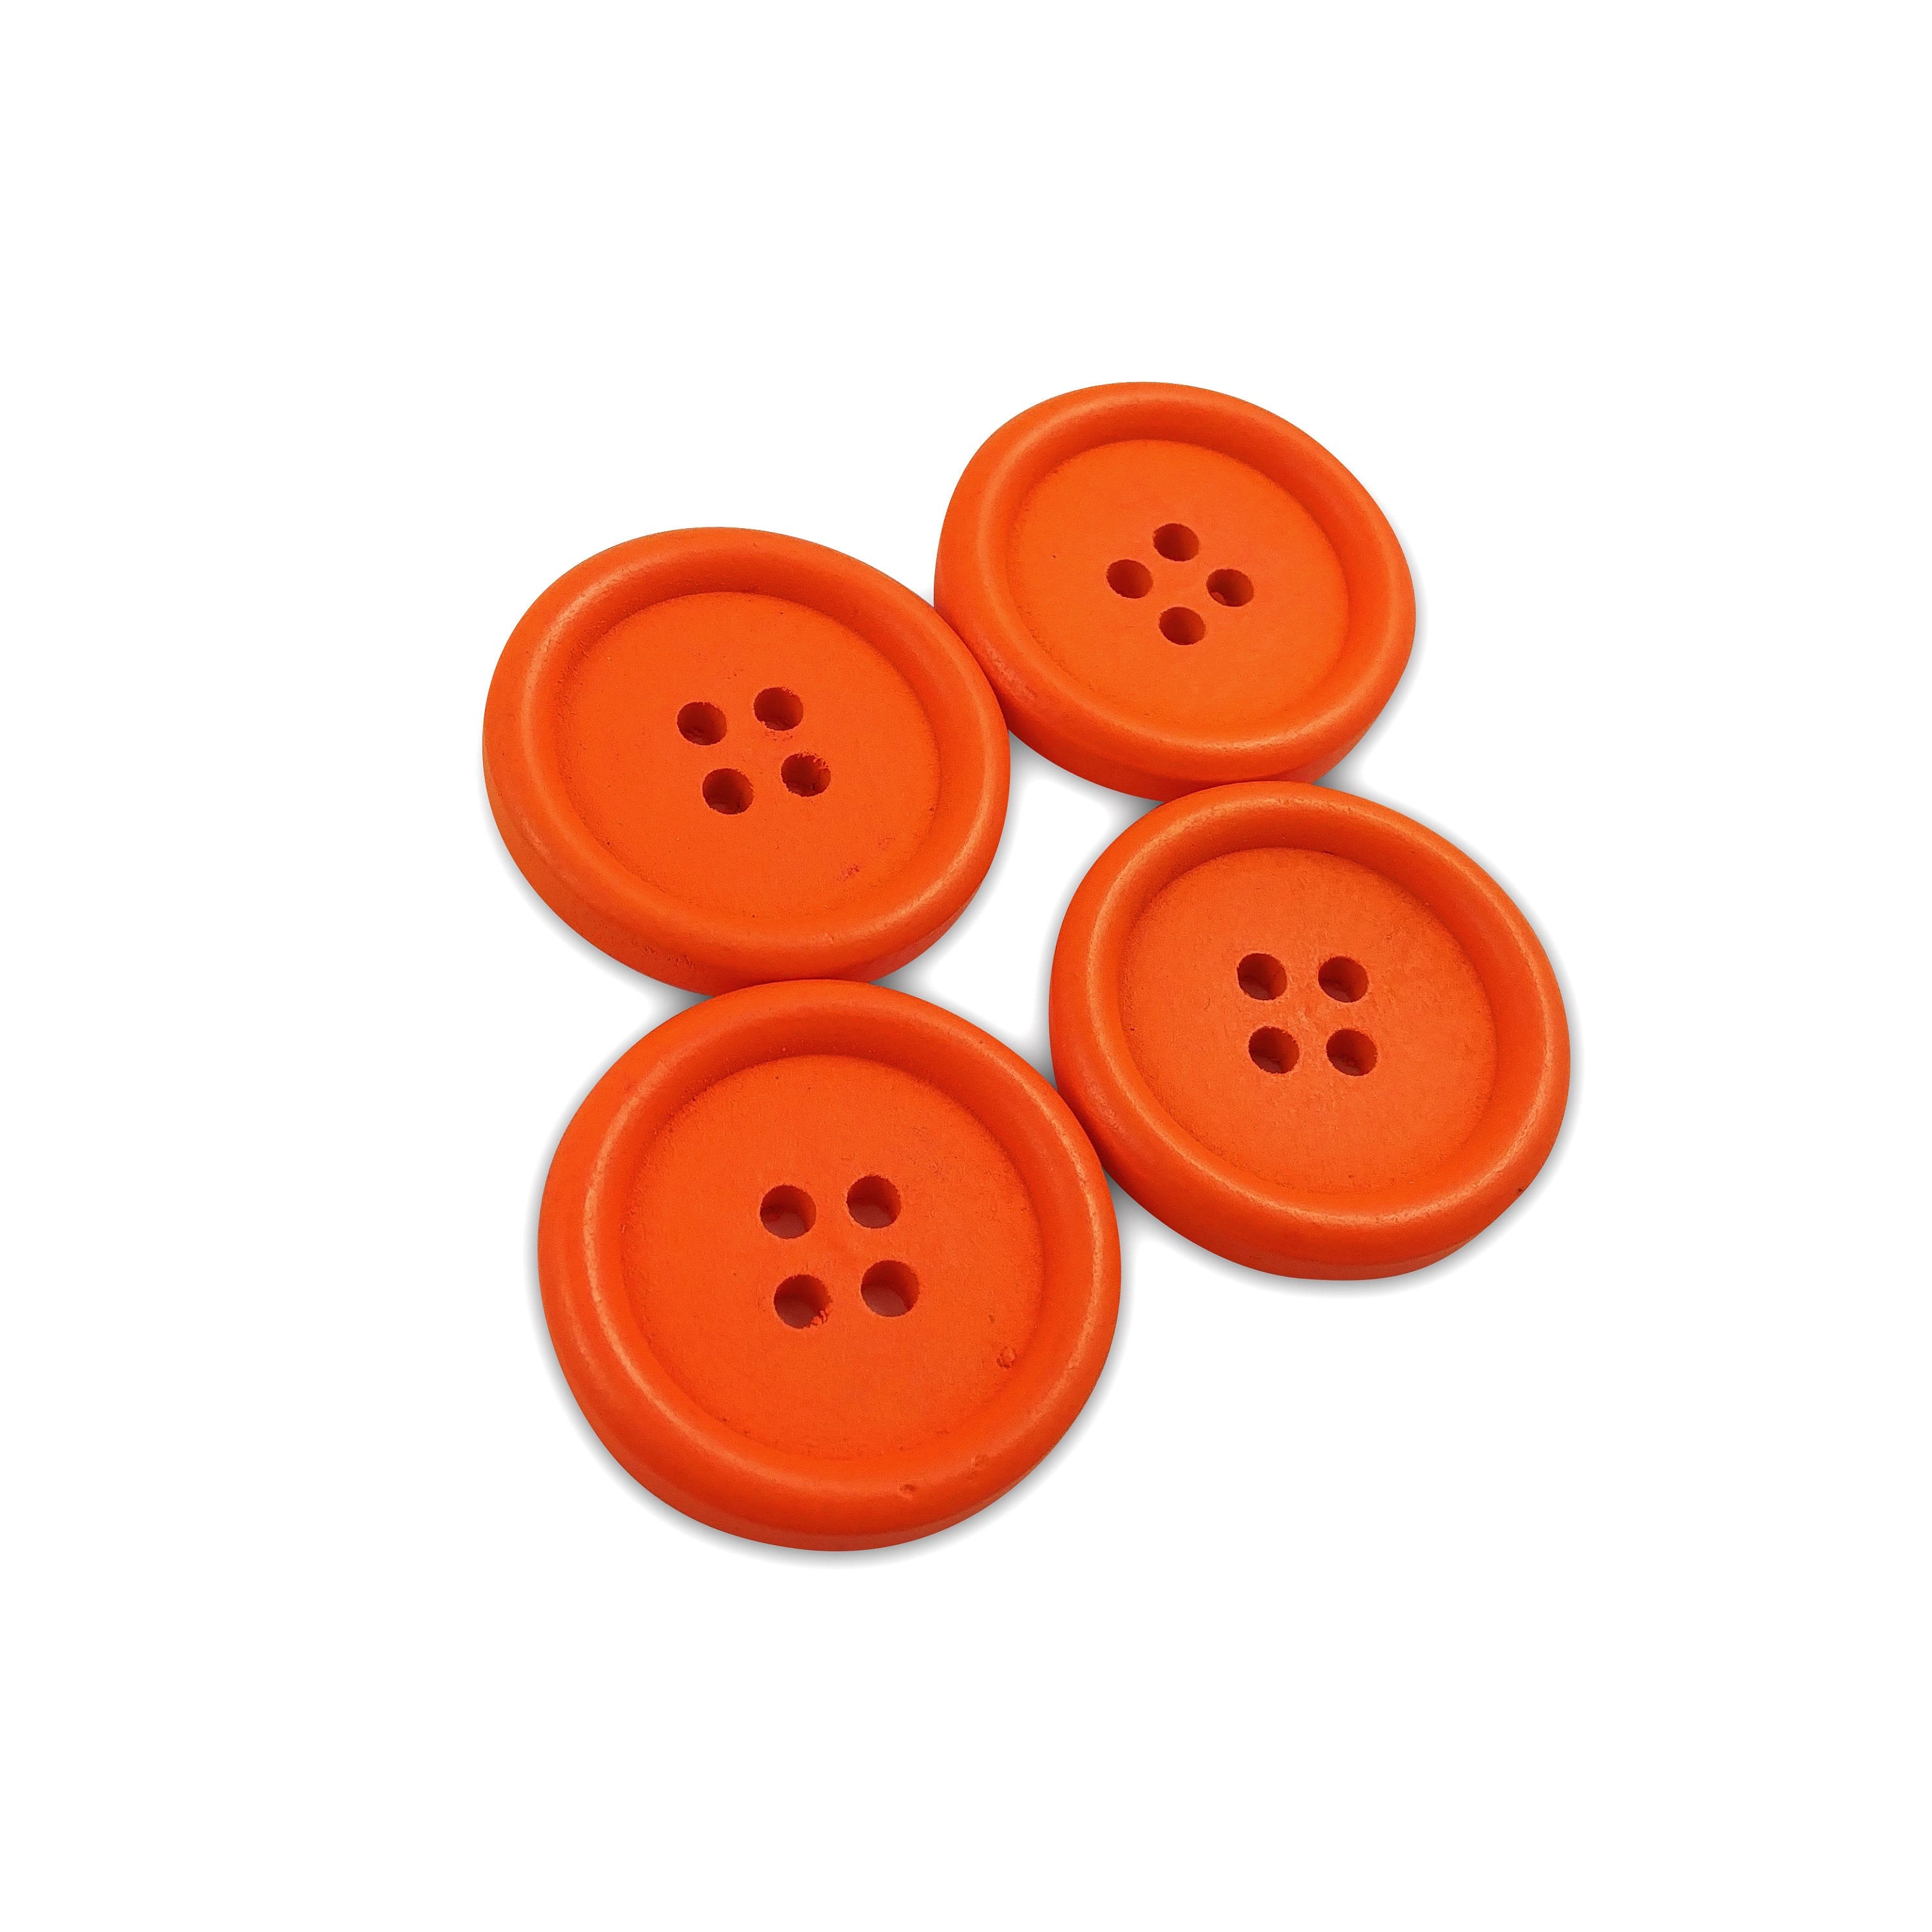 30mm wooden colorful buttons - Set of 4 wood button - Choose your color